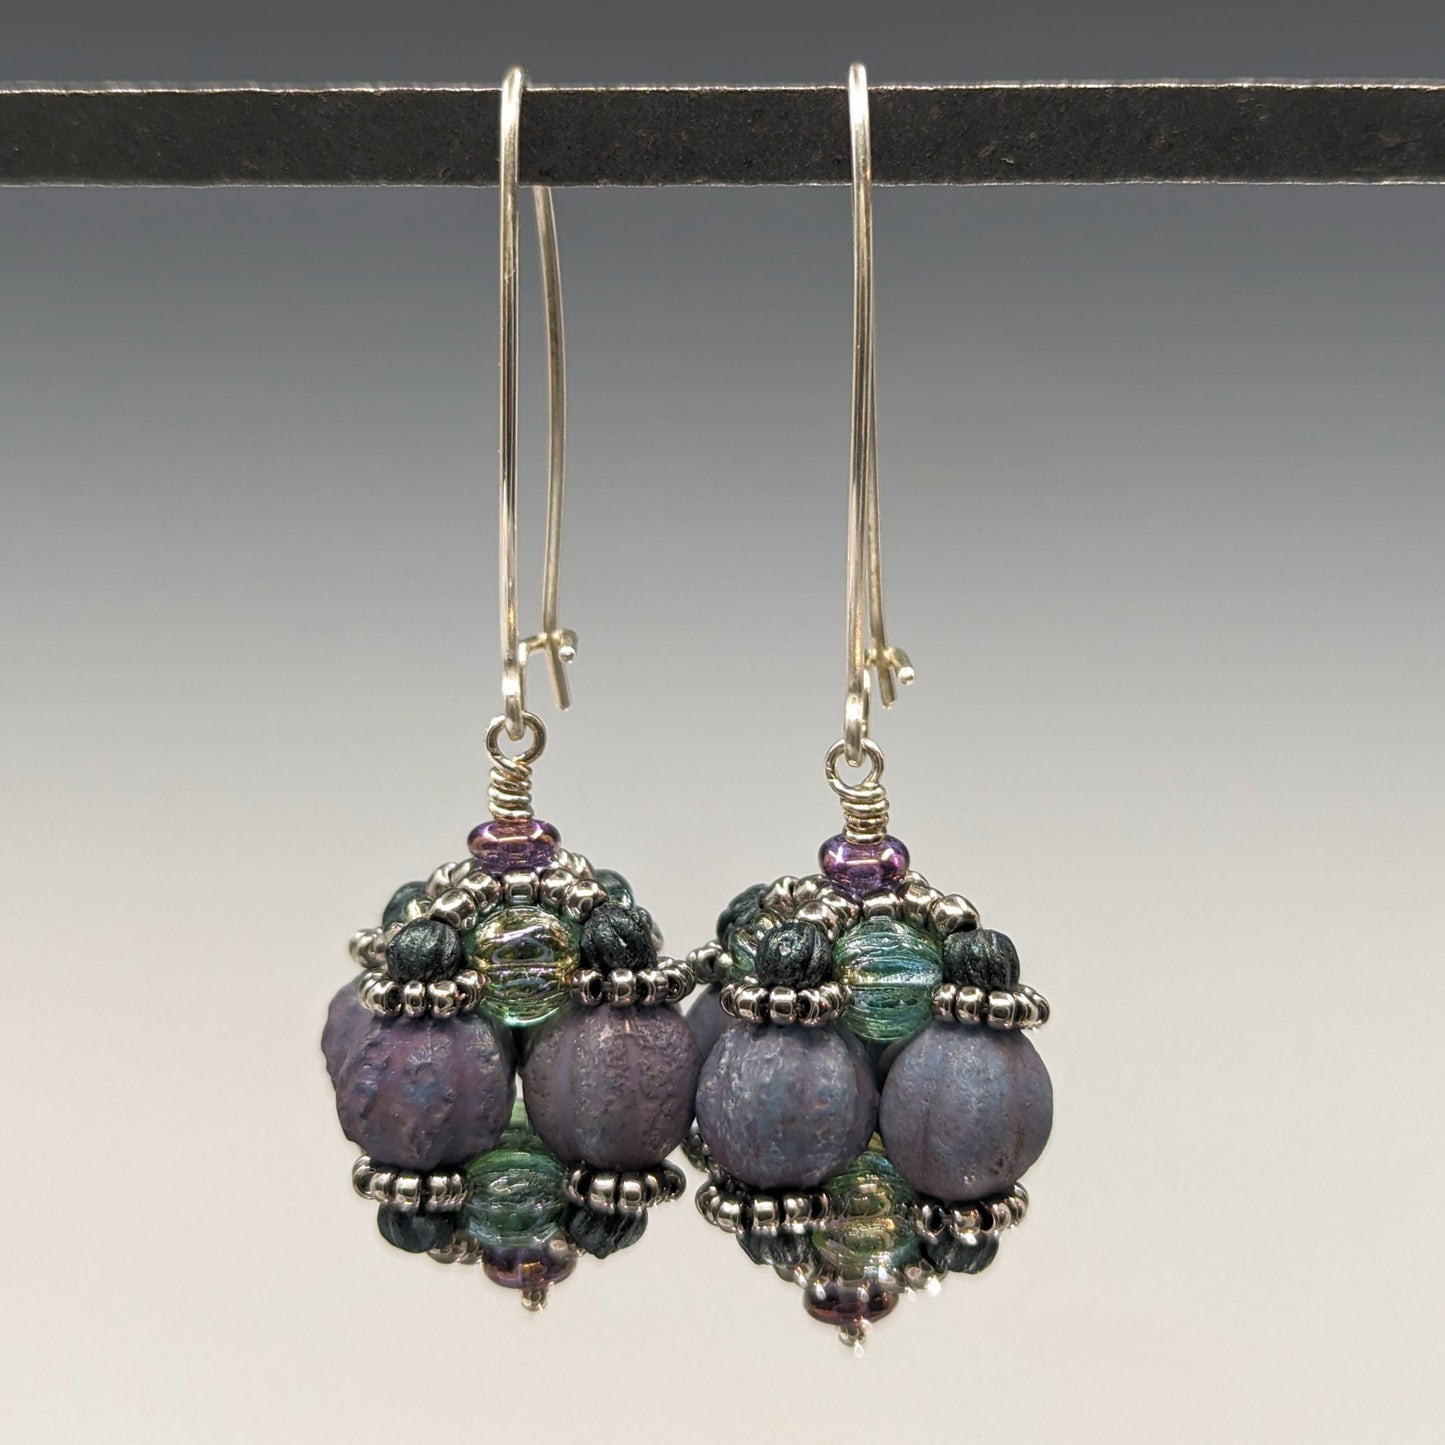 A pair of earrings hang from a black bar, against a gray background. The earrings have long silver oval wires that latch and there is a beaded ball dangling from the bottom of each earring. The beaded beads are s made from rough textured lilac beads surrounded by layers of silver and sea green beads. 